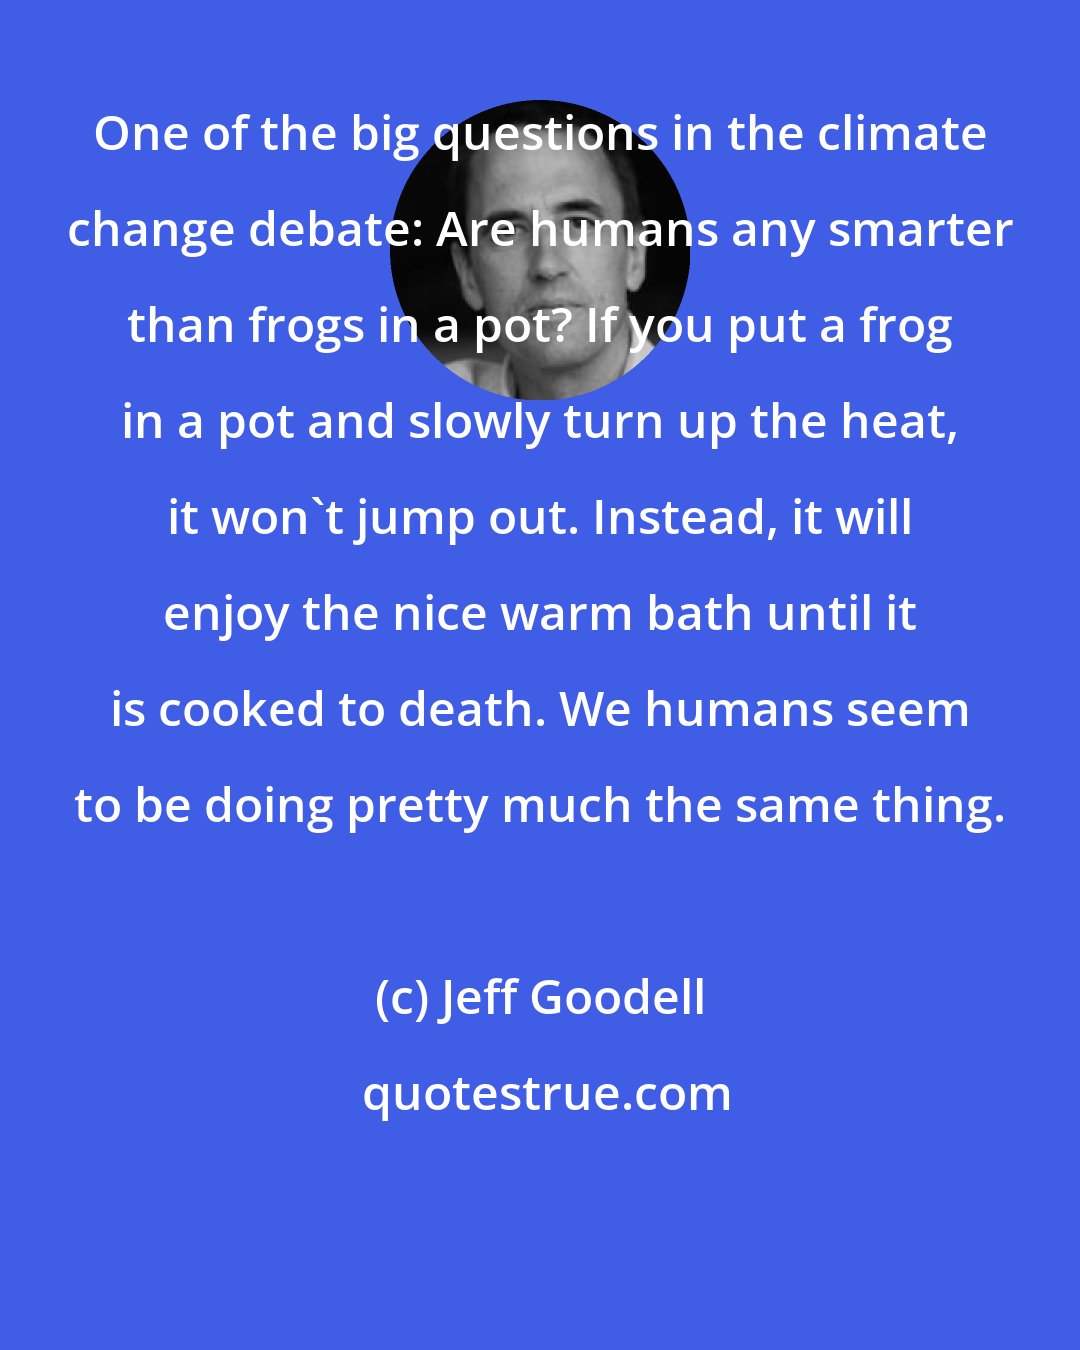 Jeff Goodell: One of the big questions in the climate change debate: Are humans any smarter than frogs in a pot? If you put a frog in a pot and slowly turn up the heat, it won't jump out. Instead, it will enjoy the nice warm bath until it is cooked to death. We humans seem to be doing pretty much the same thing.